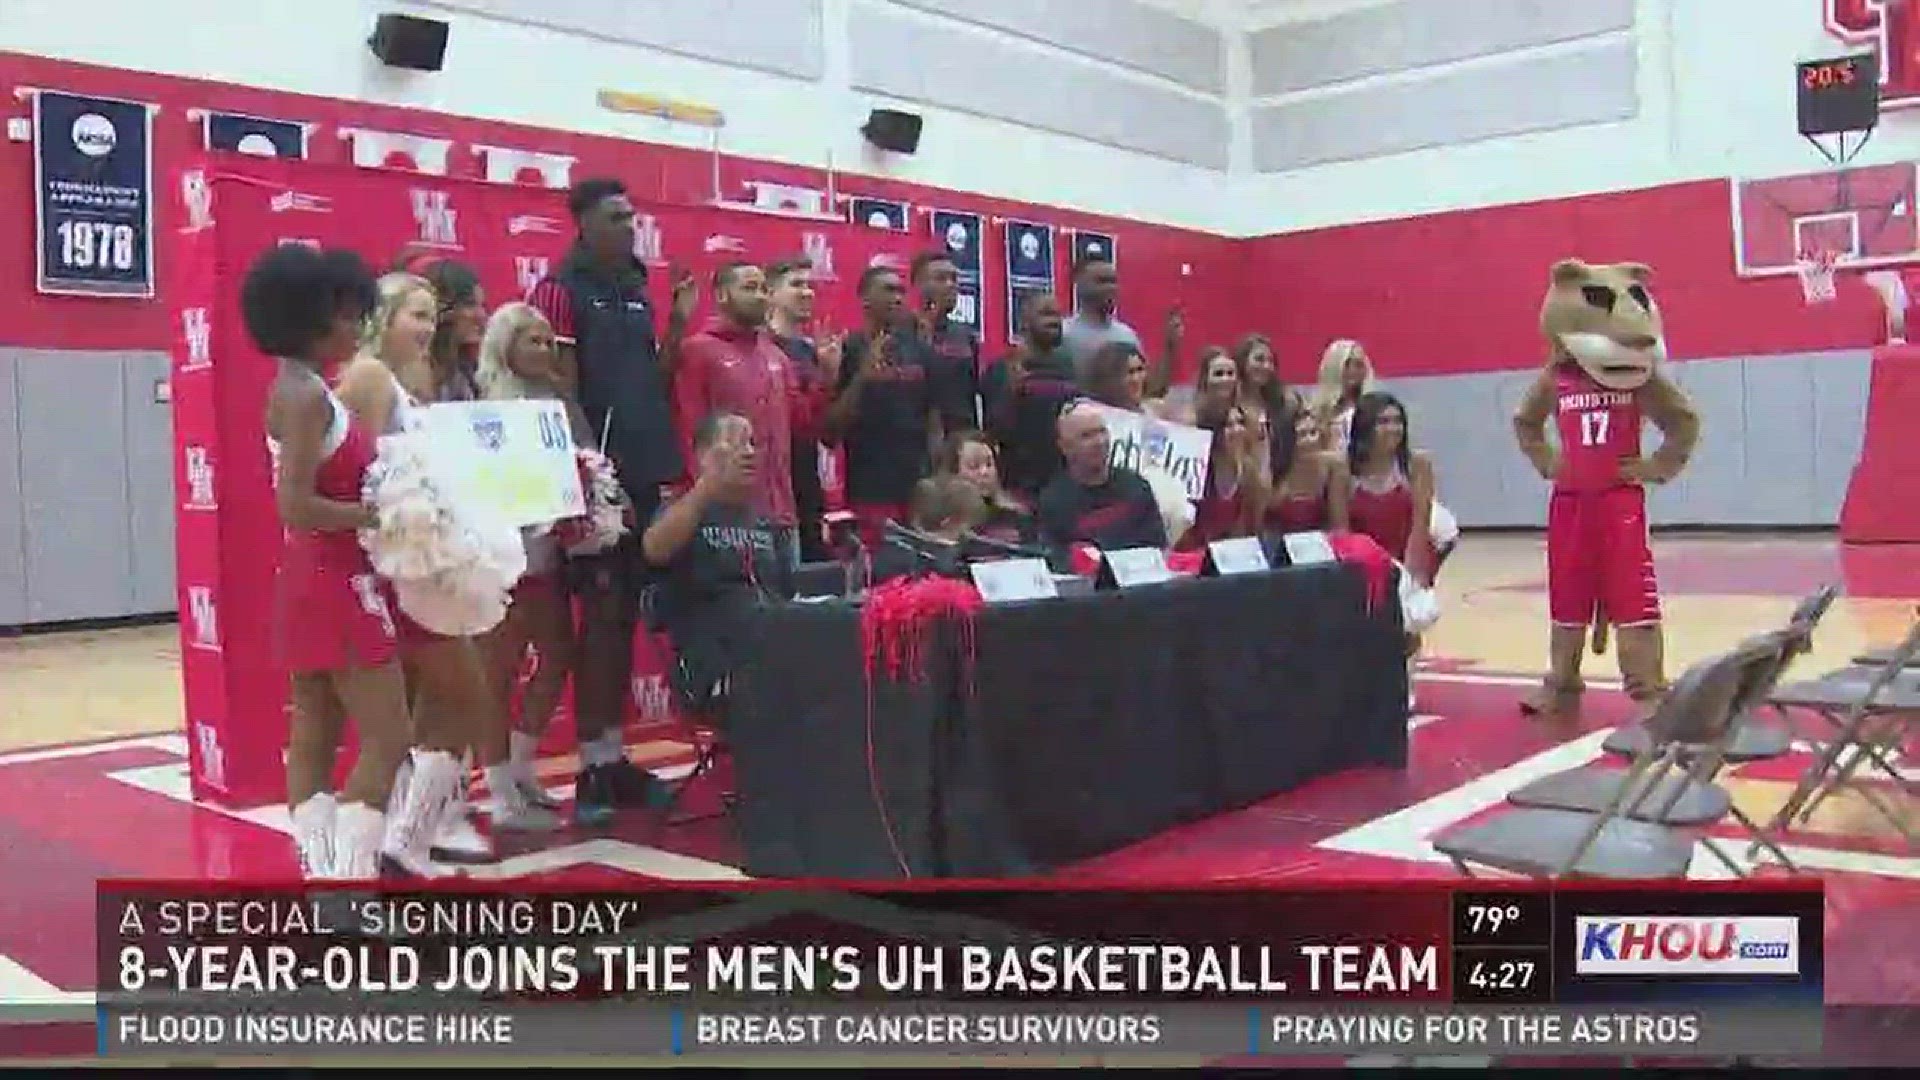 Eight-year-old Nicholas Hickey had a special signing day with the UH men's basketball team.